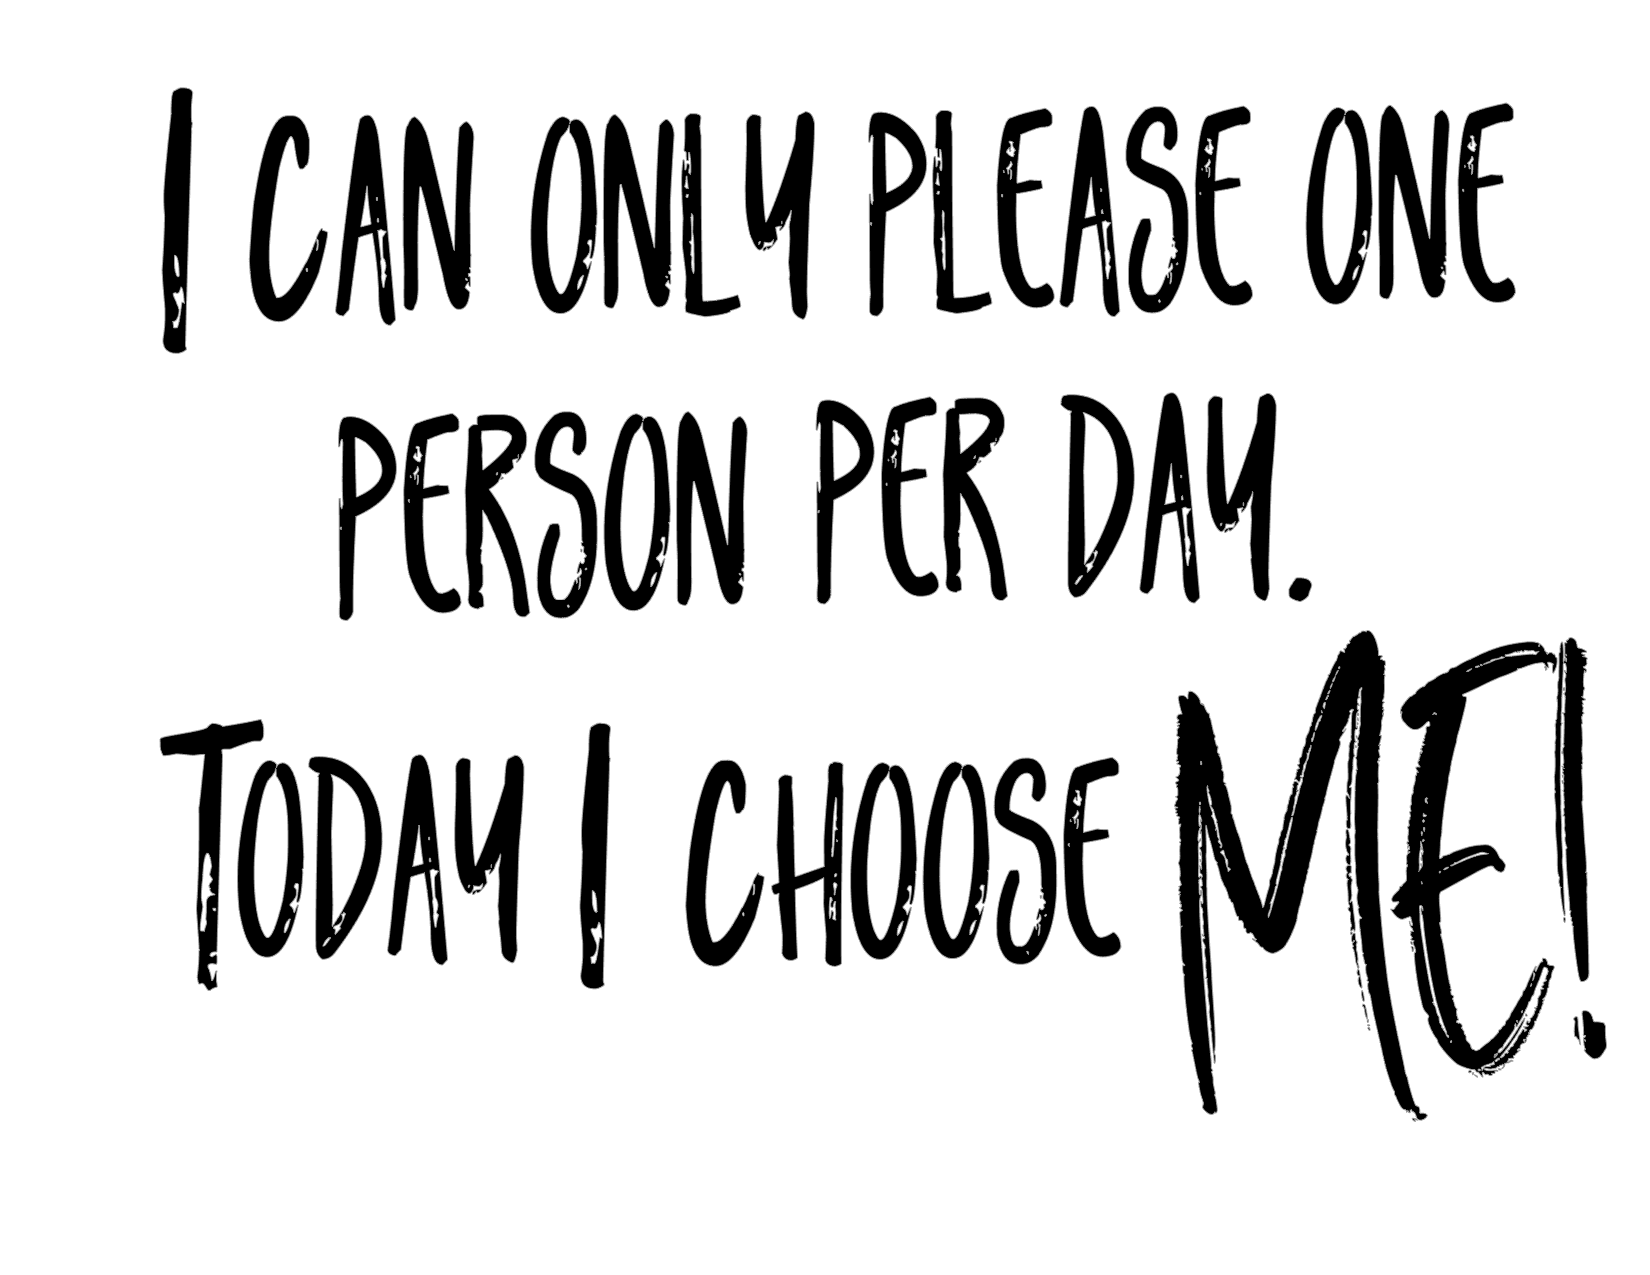 #29 I can only please one person per day. Today I choose Me!